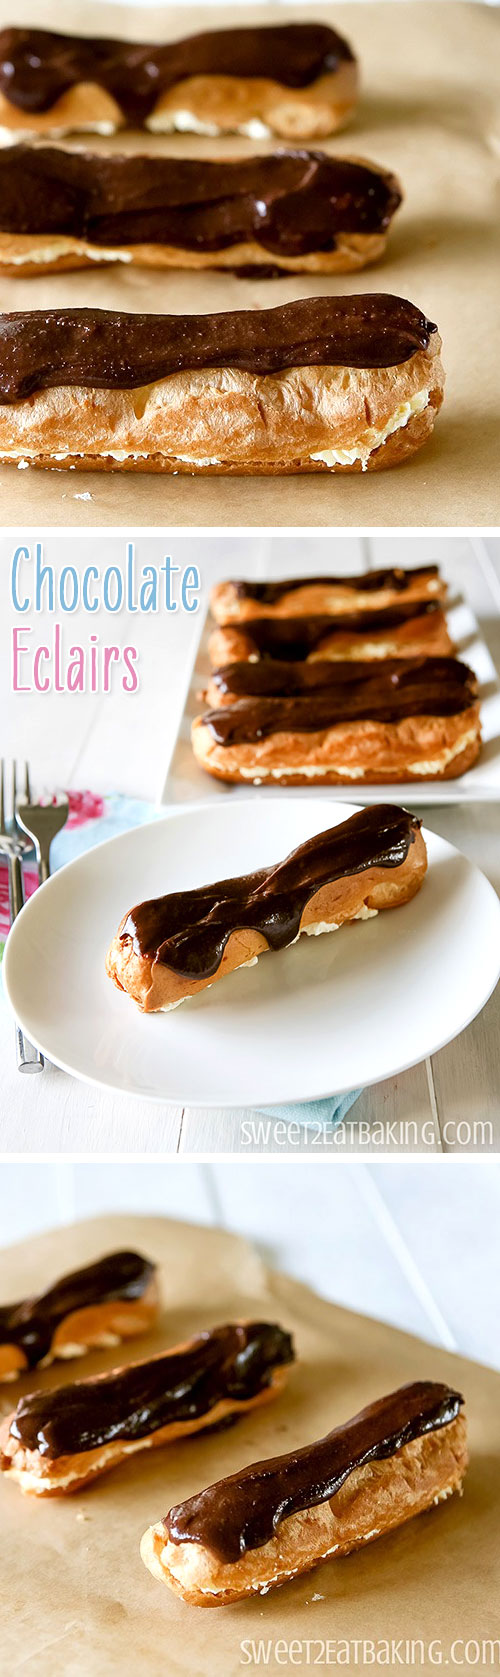 Chocolate Eclairs Recipe by Sweet2EatBaking.com | Don't be put off by the choux pastry, it's easy to make! A quick and easy dessert recipe.